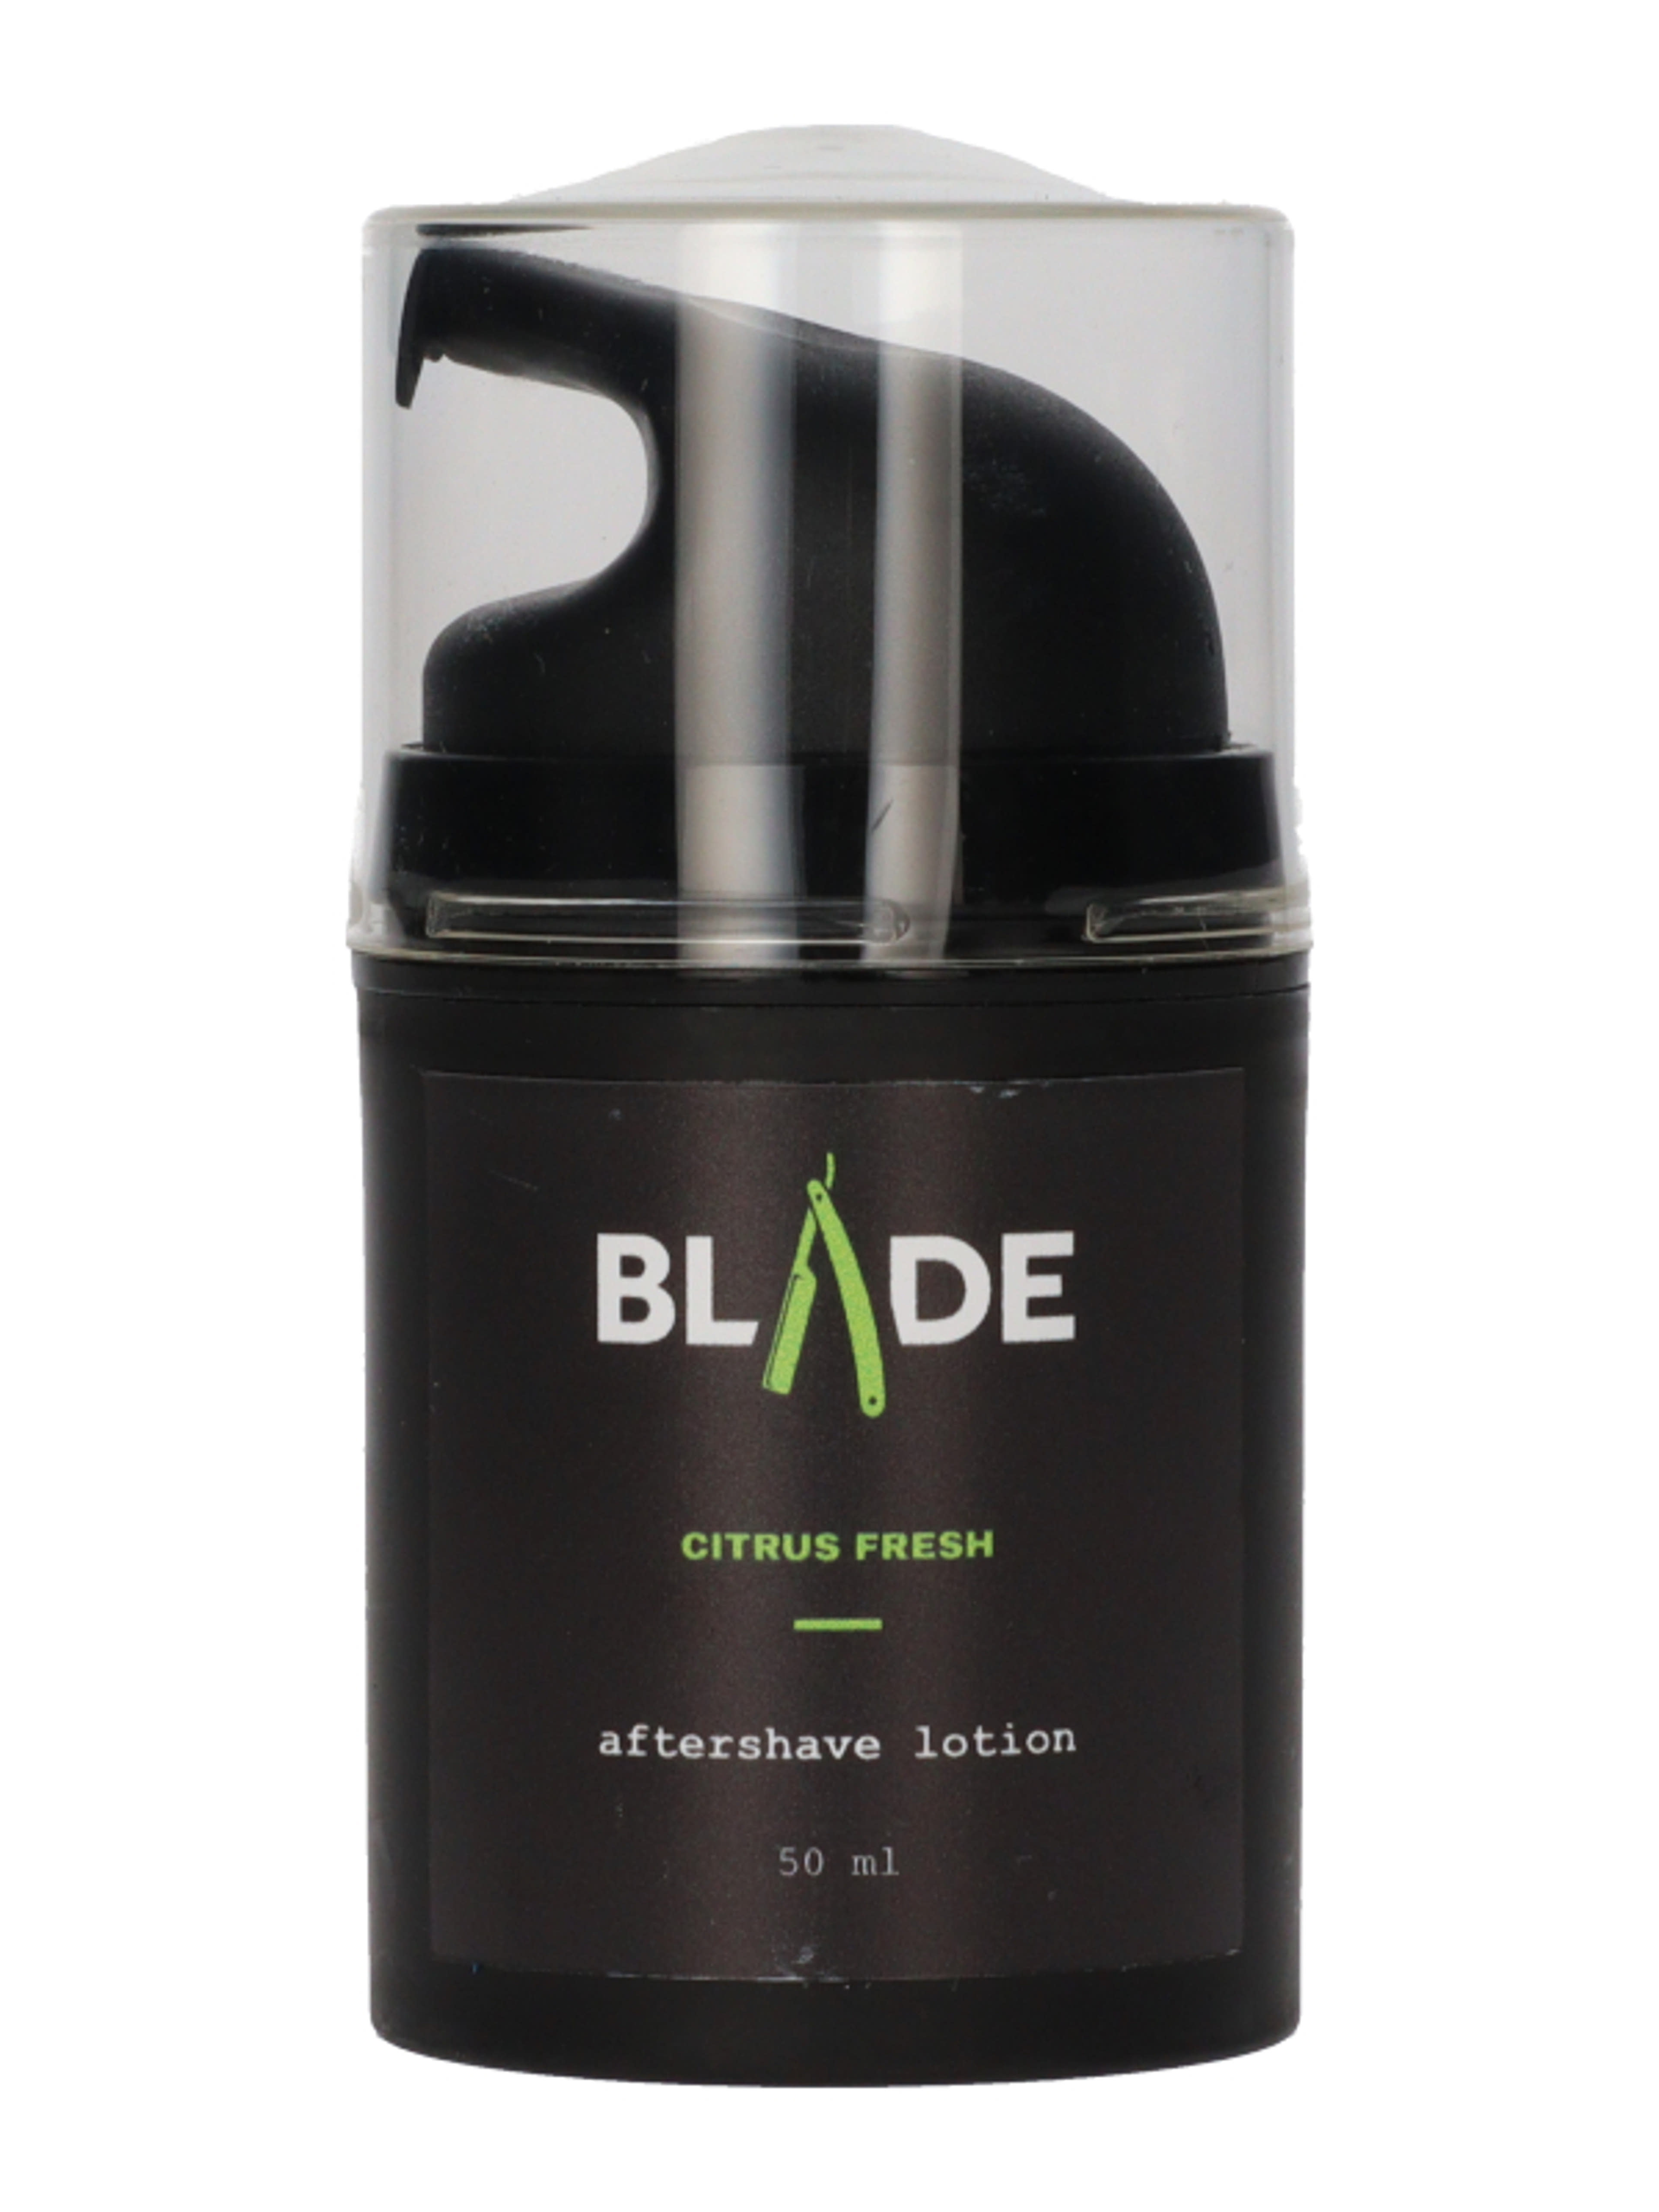 Blade aftershave lotion - 50 ml